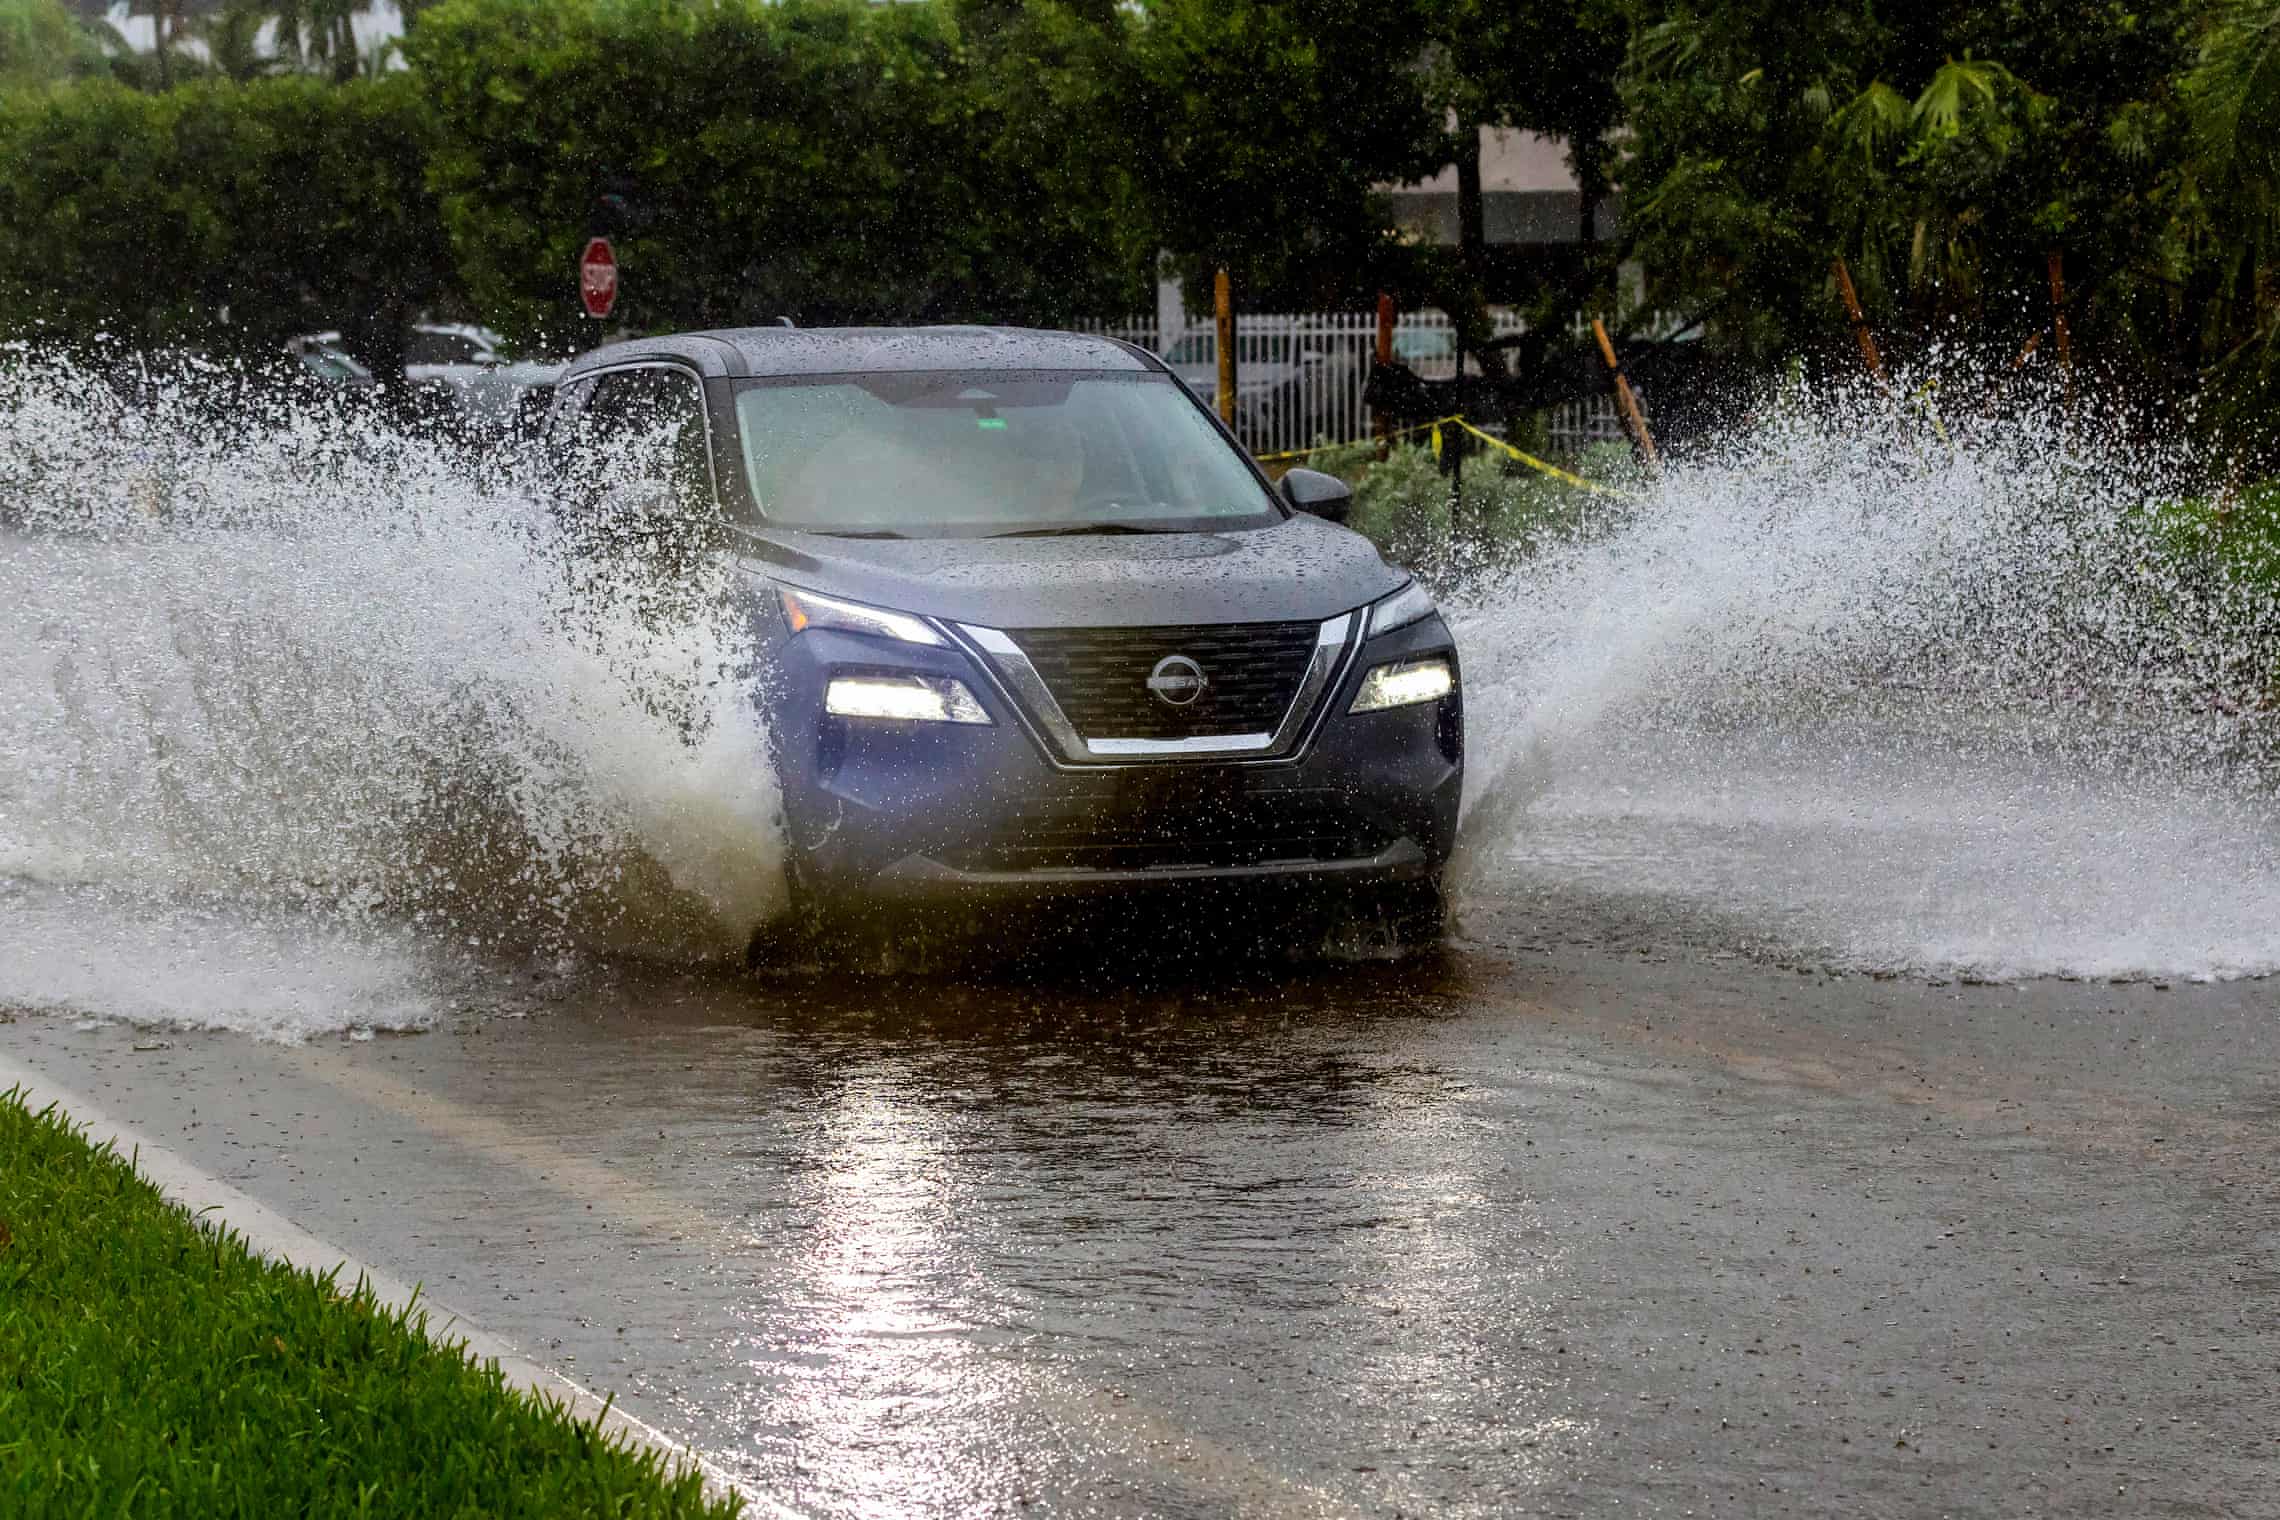 Southern Florida sees record breaking rain